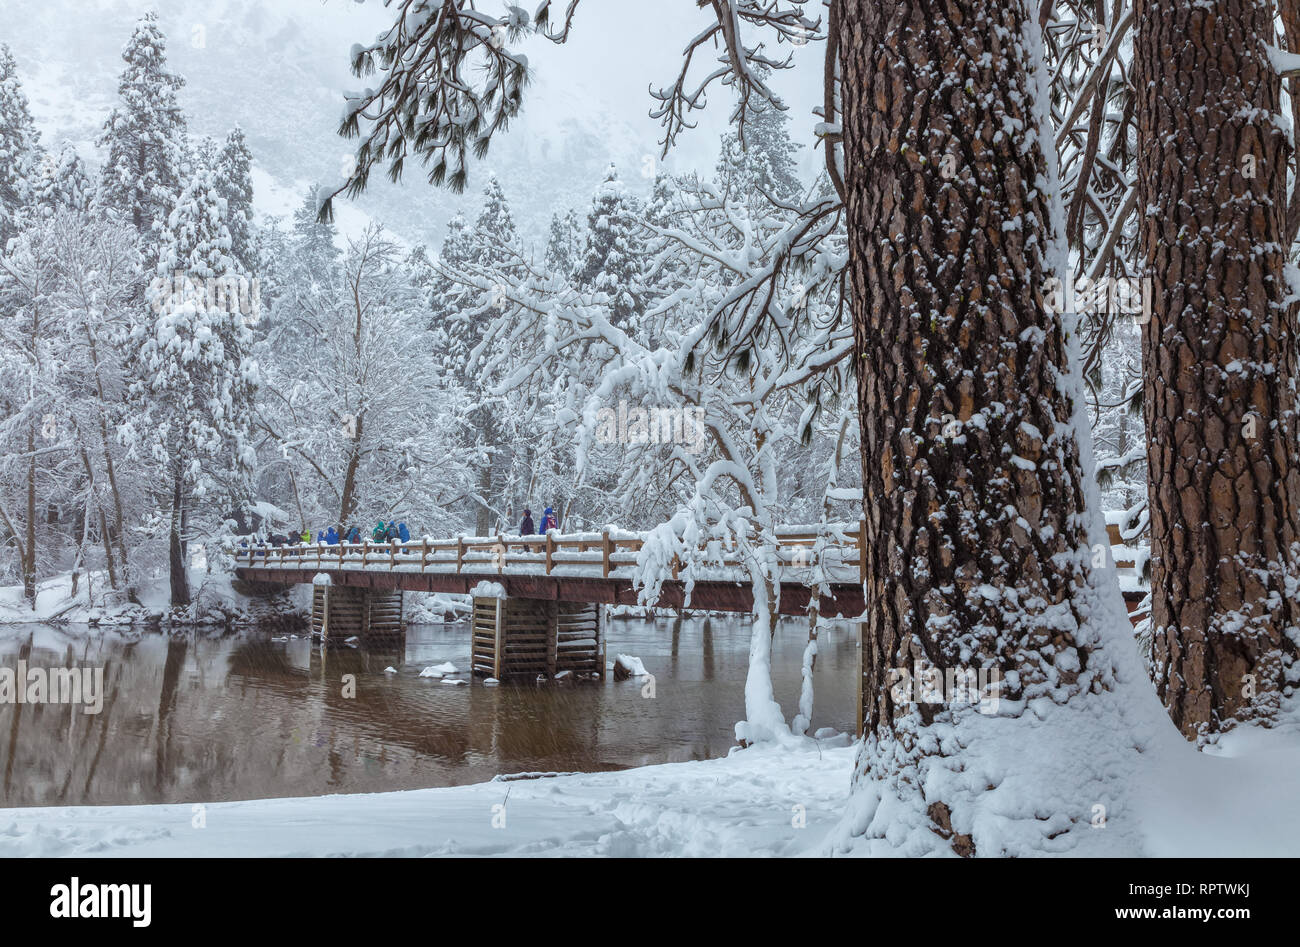 Jeffrey pines (Pinus jeffreyi), with bridge over the Merced River and the snow covered landscape at Yosemite National Park in winter, California, USA Stock Photo